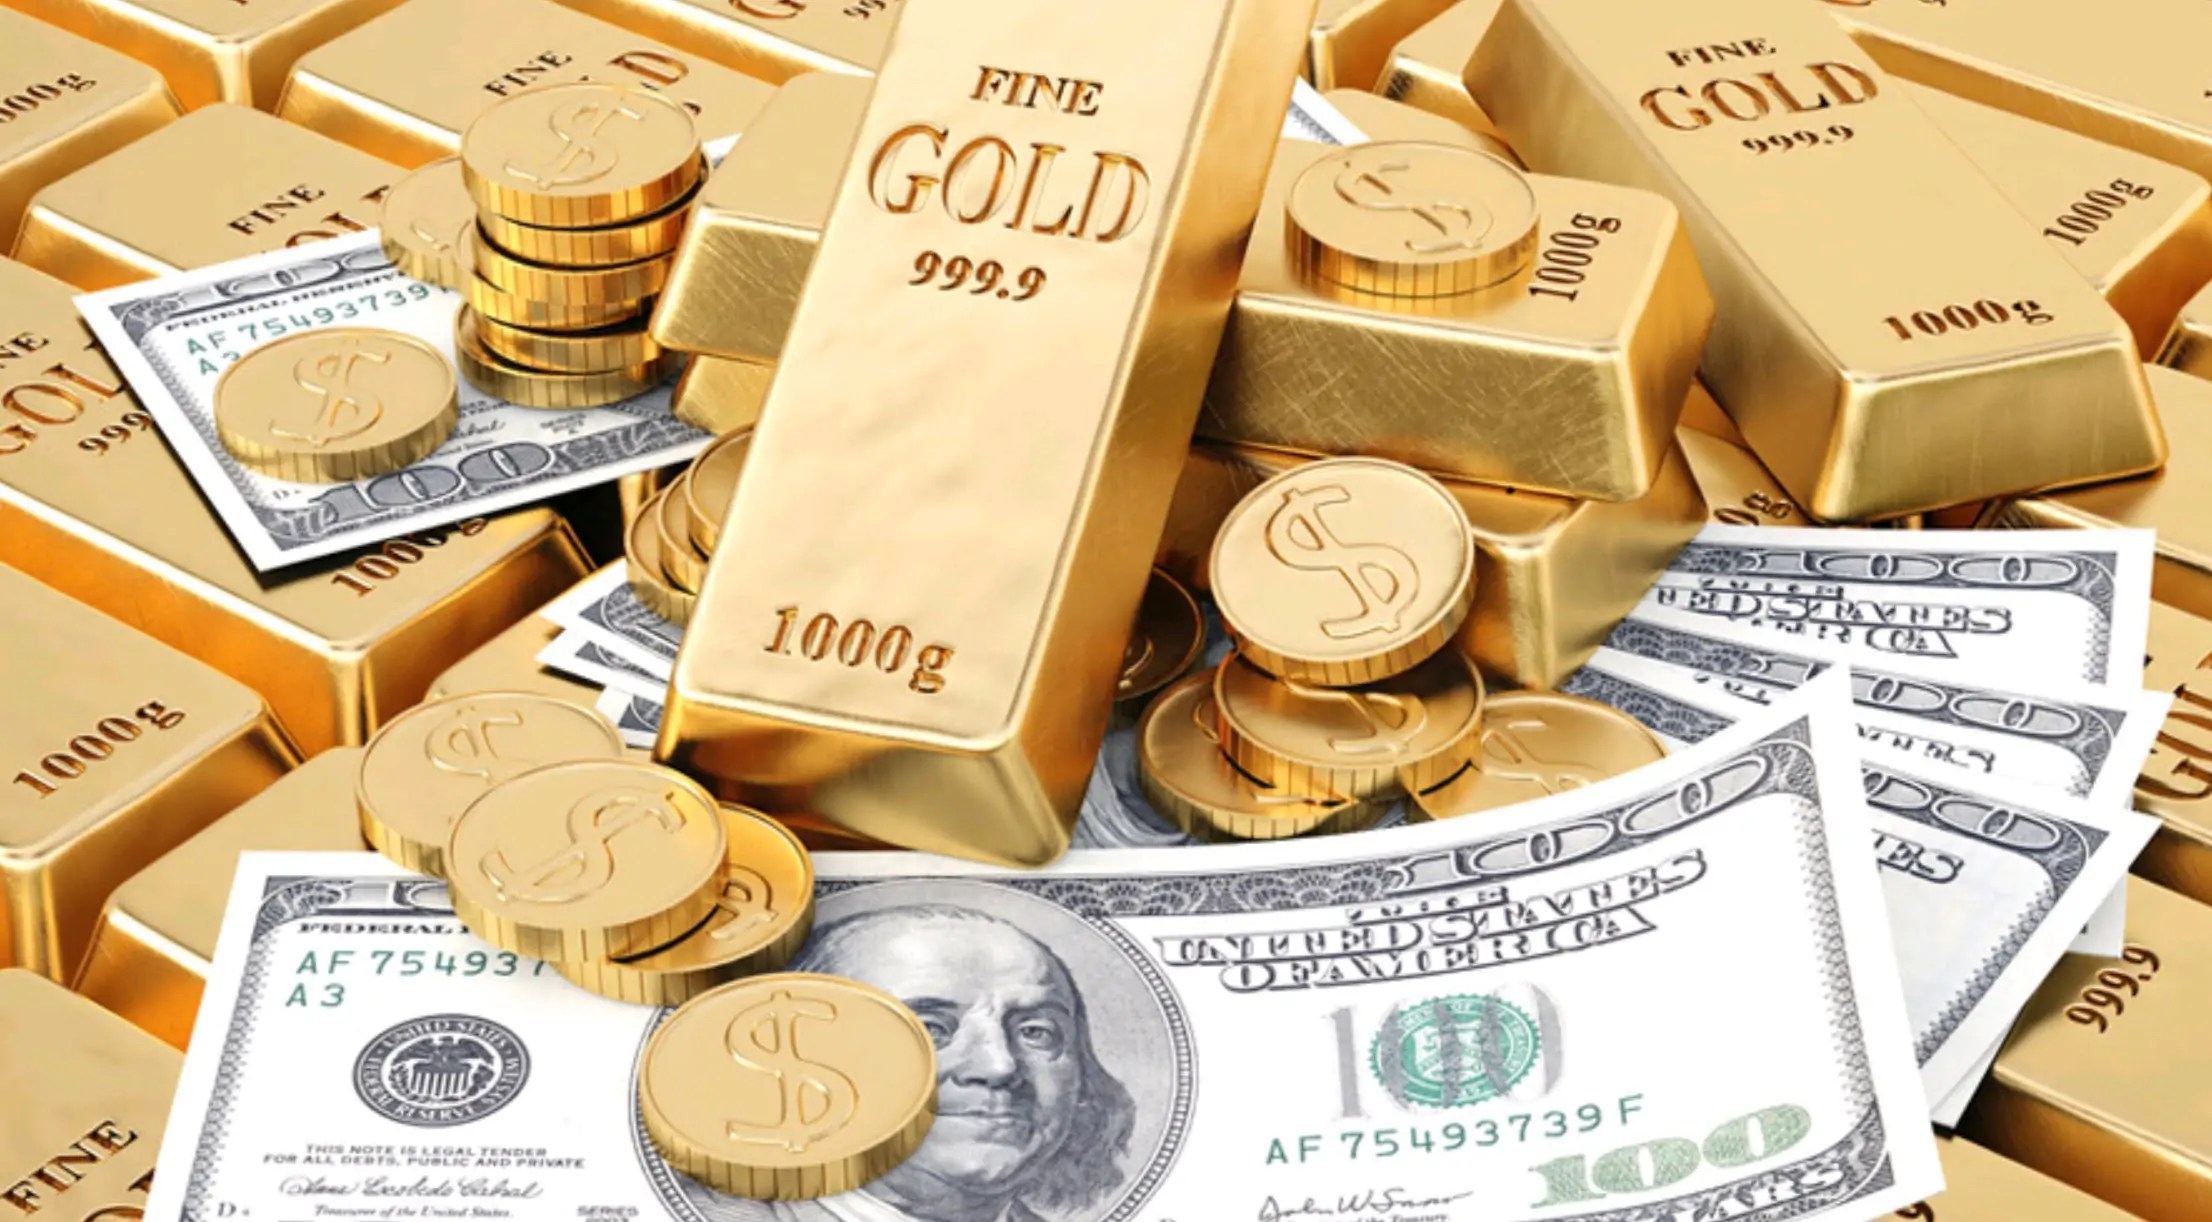 King-World-News-One-Of-The-Greats-Says-This-Will-Be-The-Big-Test-For-The-Gold-Market.jpg